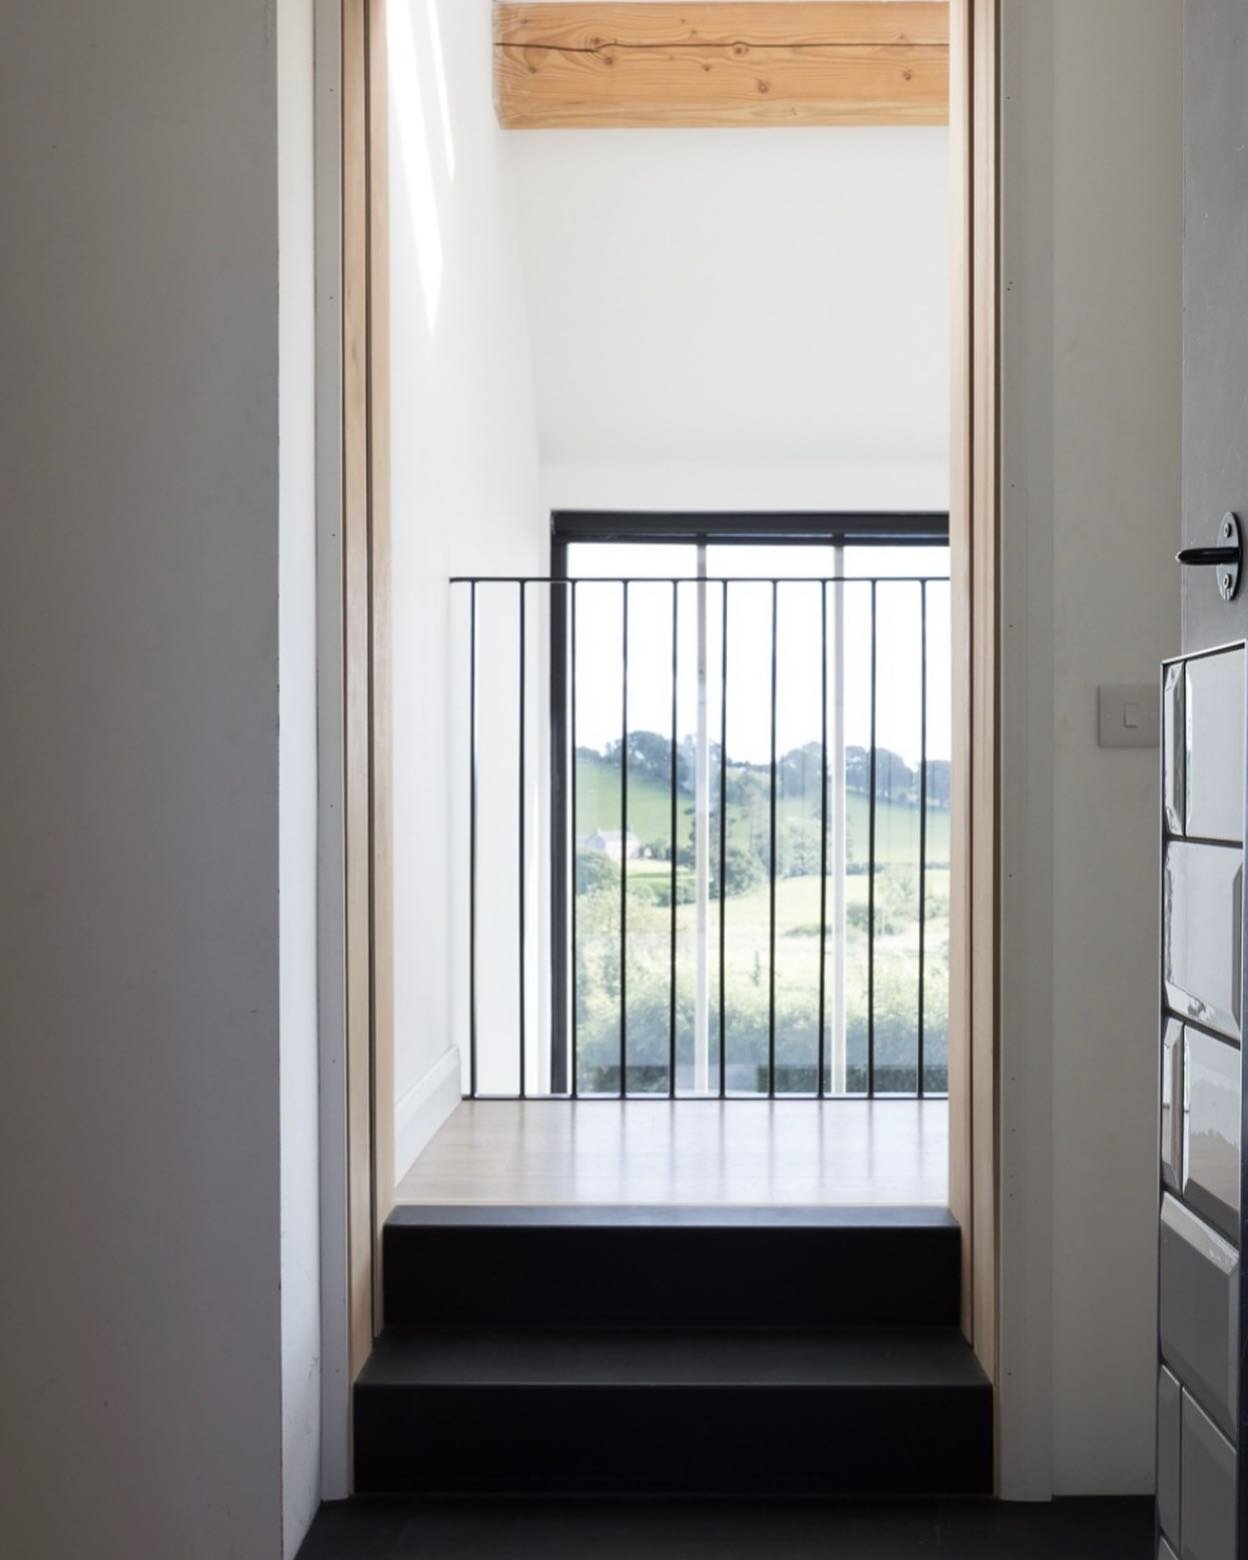 Black pressed metal steps and a ope dressed in oak, looking through to a rustic timber purlin, black metal railings and that view.
.
Keeping the materials simple, natural &amp; details elegant. Less is more.
.
#simplematerials #woodandmetal #interior